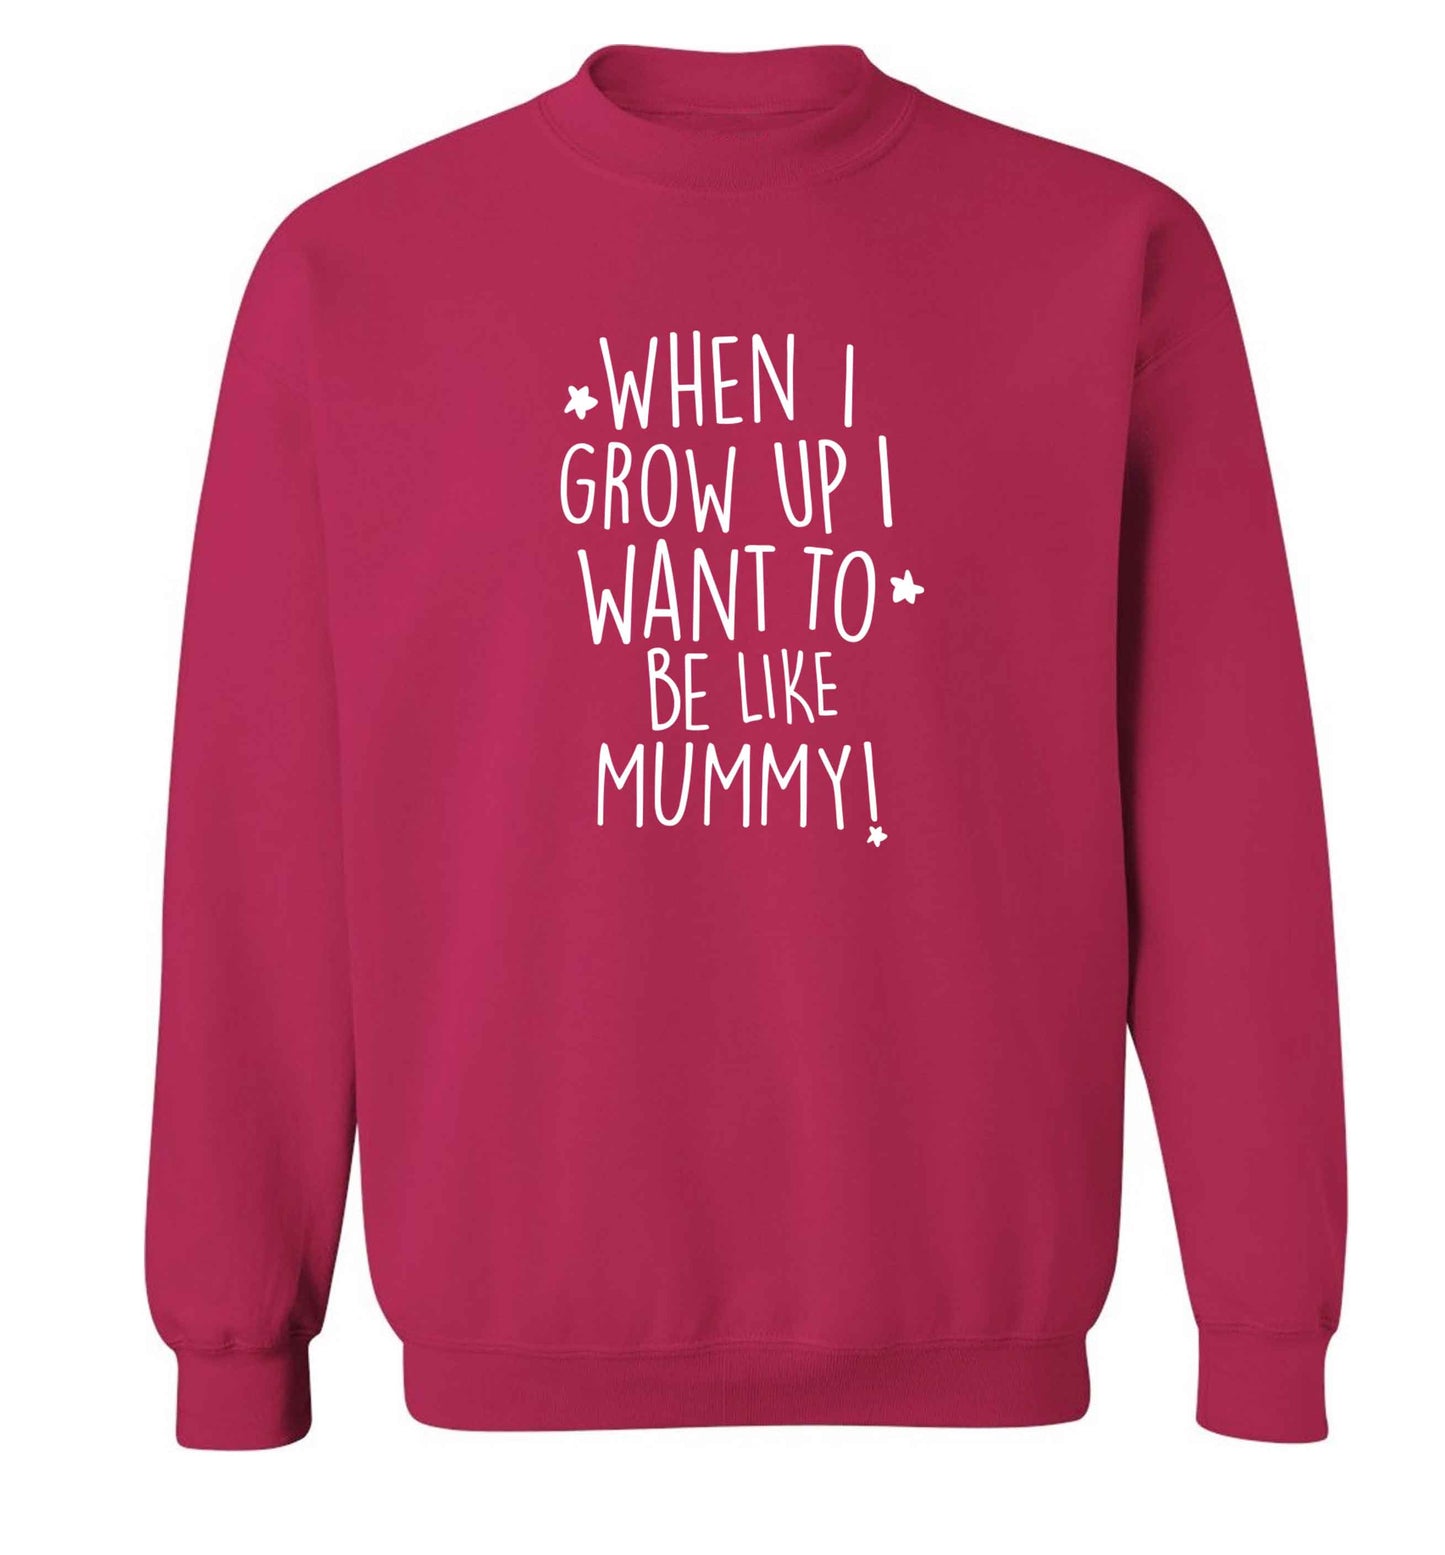 When I grow up I want to be like my mummy adult's unisex pink sweater 2XL